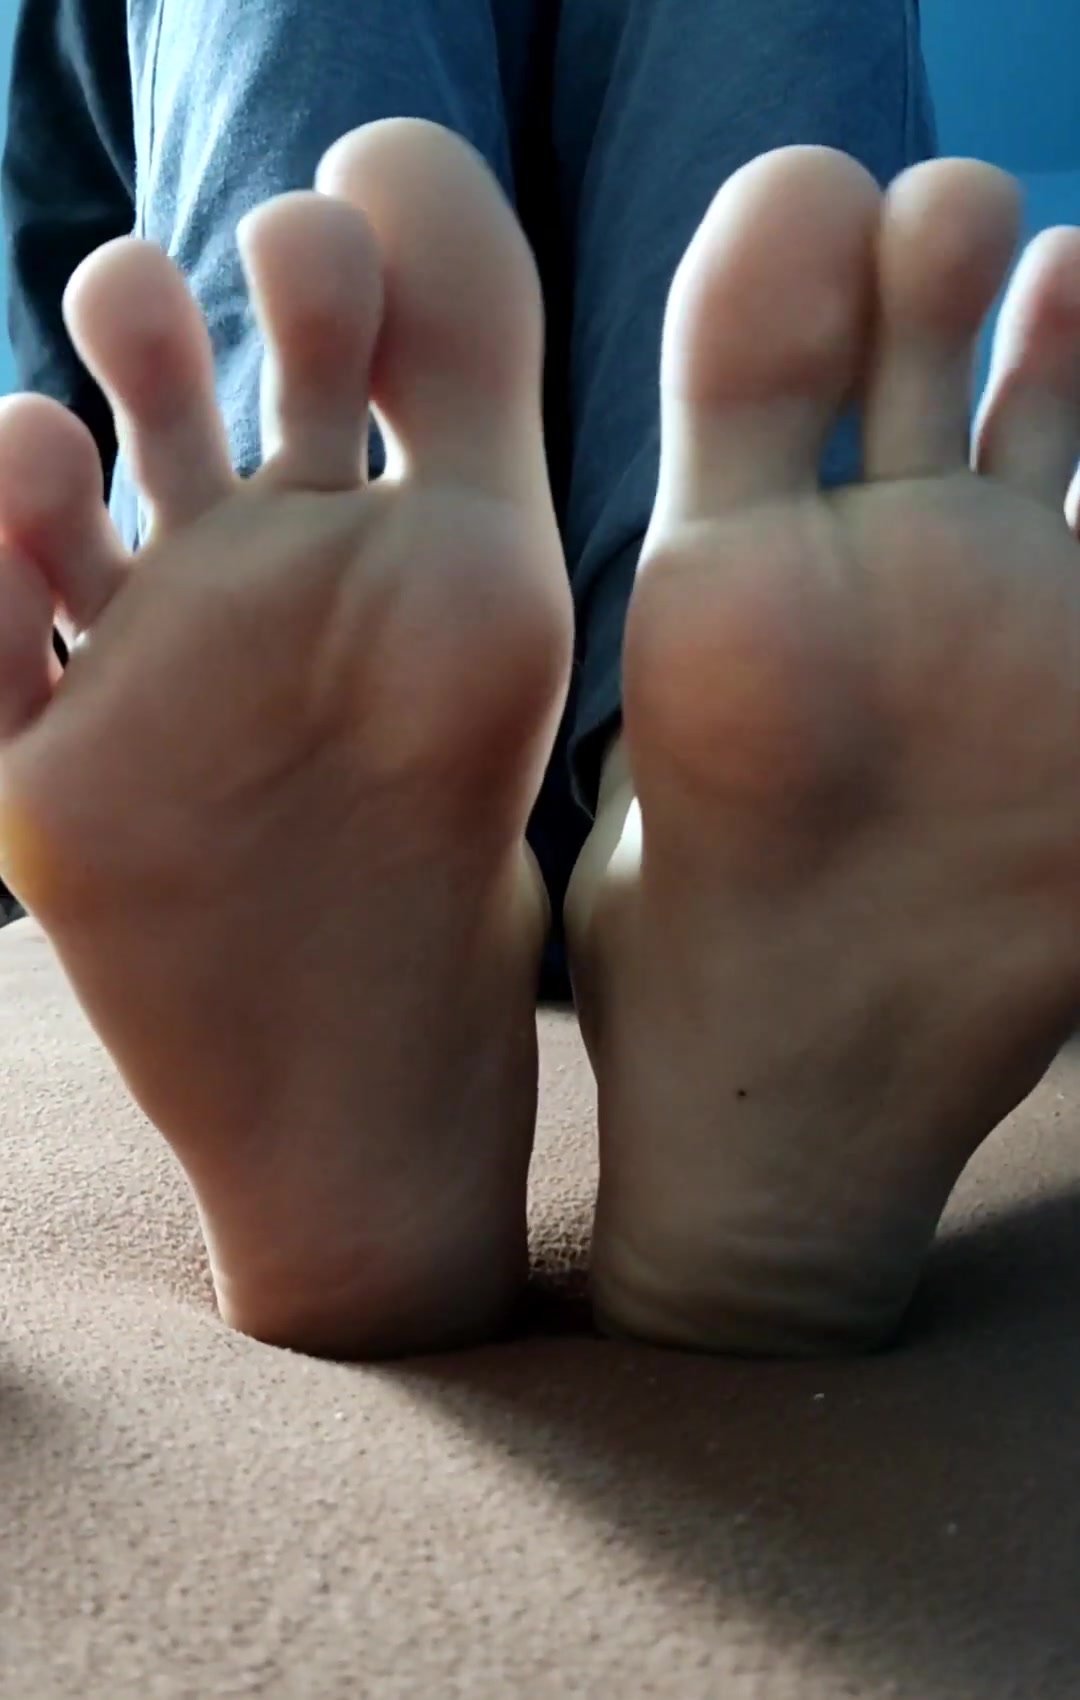 Twink Shows His Big Sexy Bare Feet